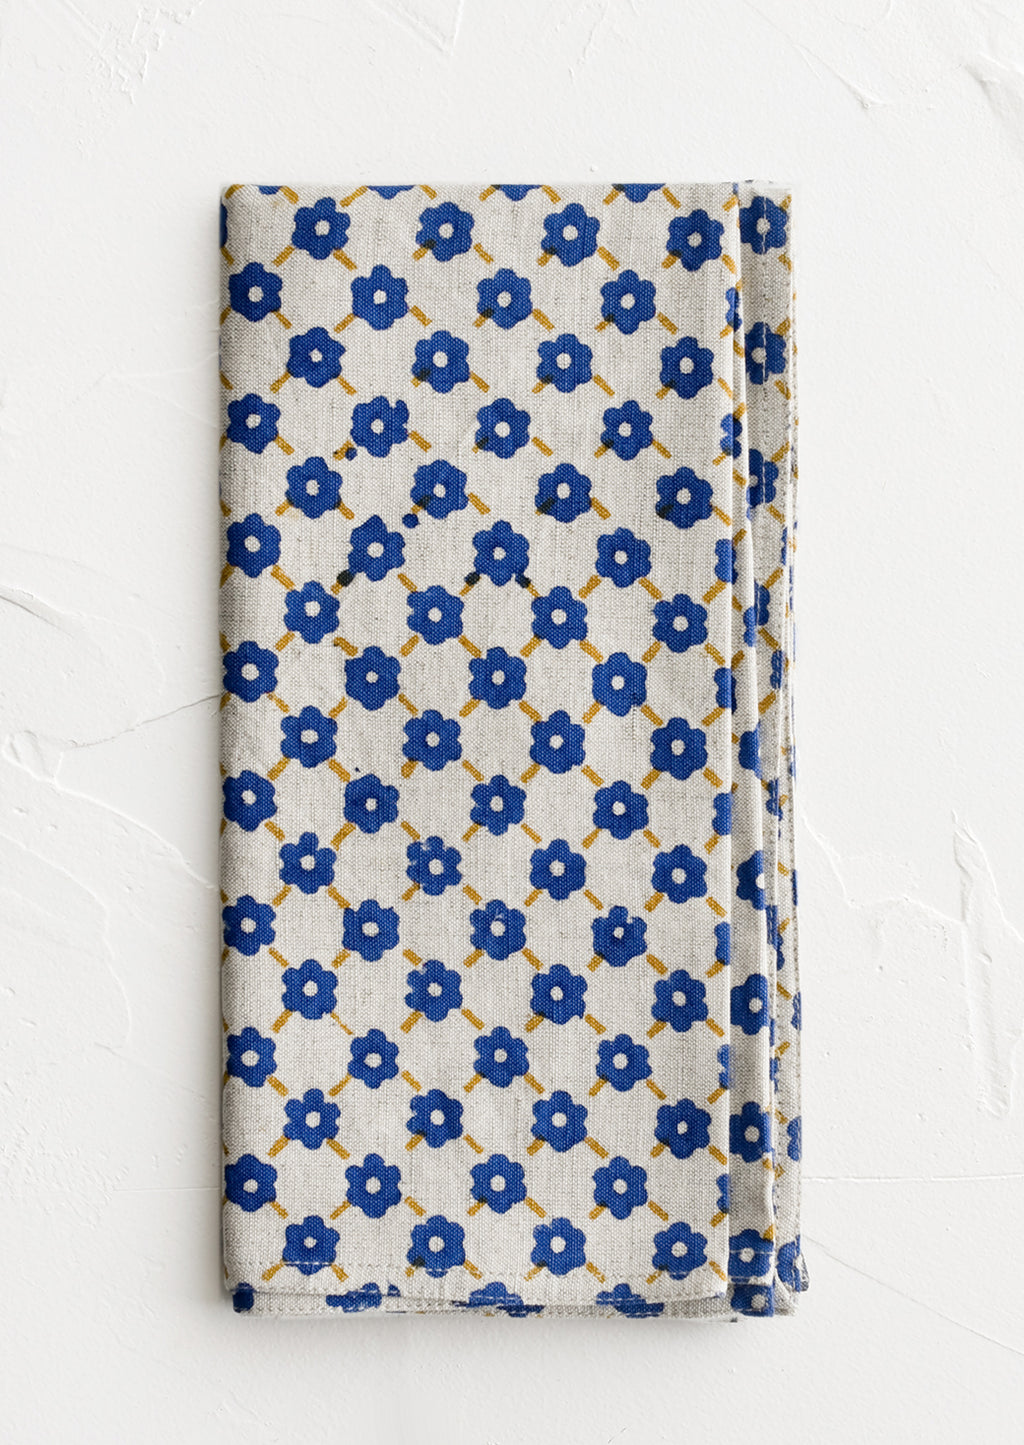 Cobalt Multi: A block printed napkin with blue and yellow floral print.